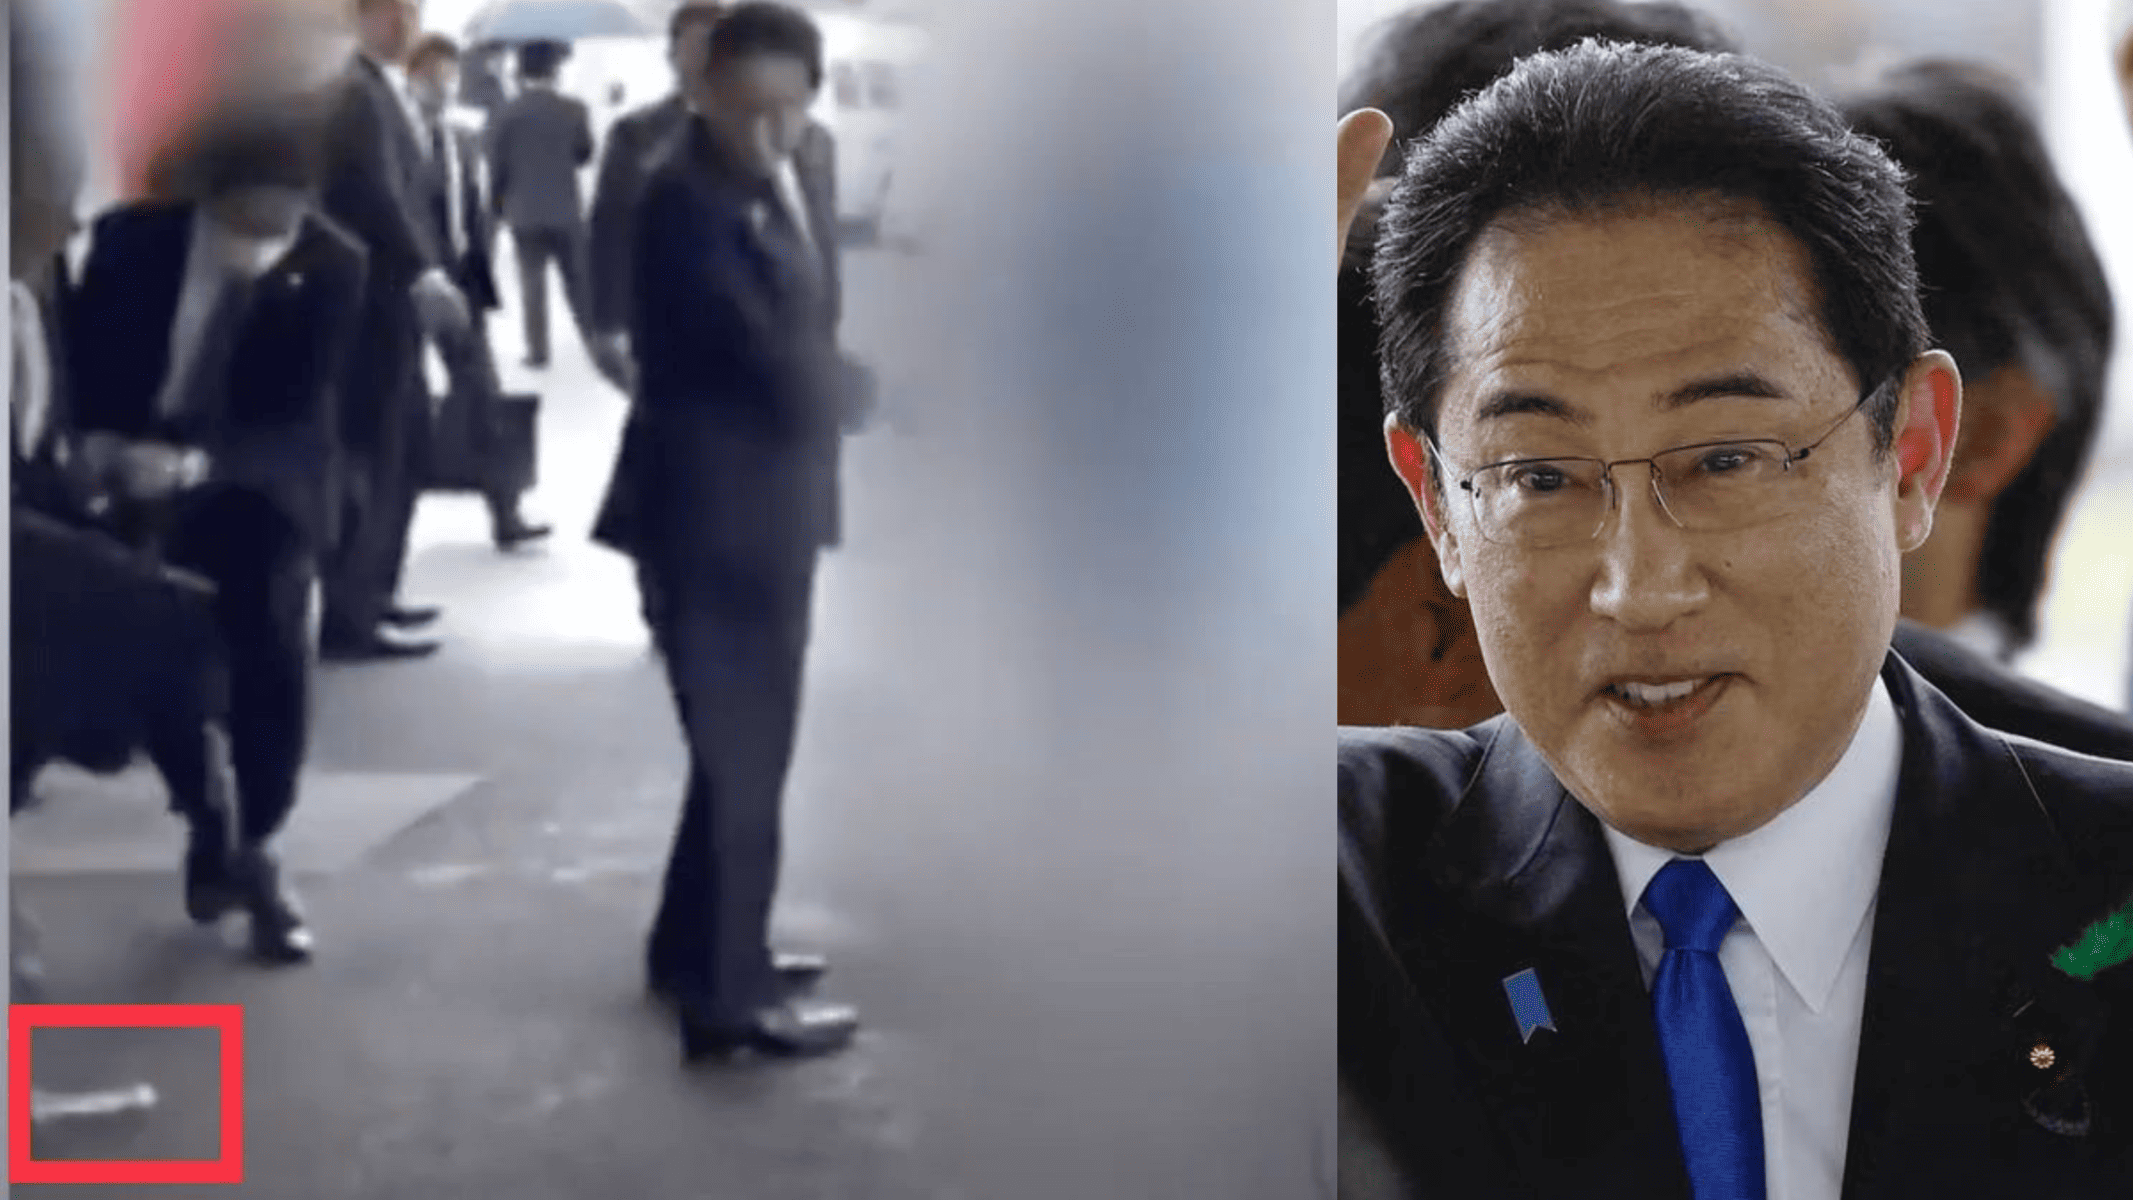 The bodyguard of the Prime Minister of Japan repelled an explosive dev